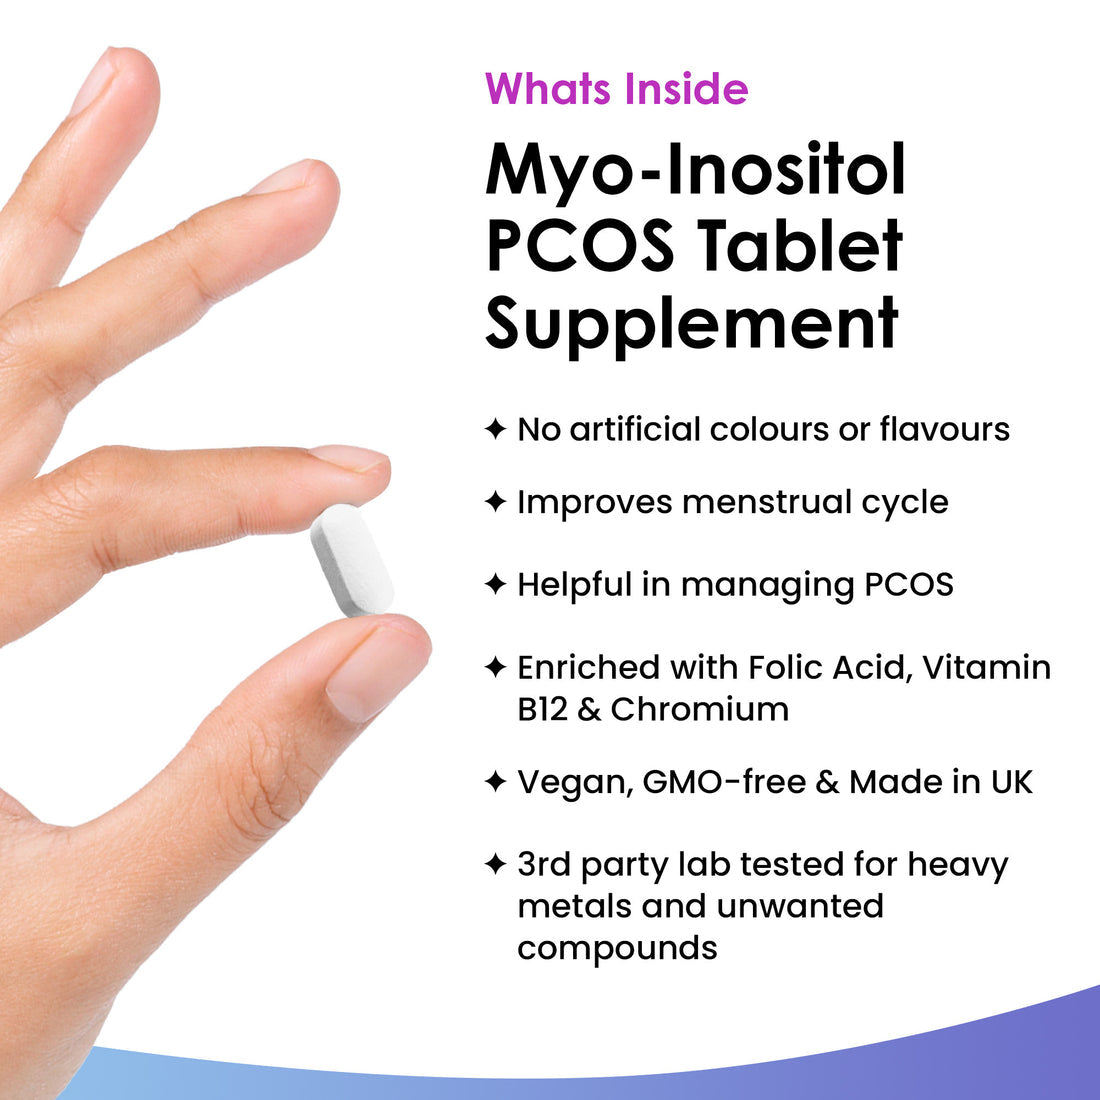 New Leaf - Myo-Inositol PCOS Supplement 2 Months Supply